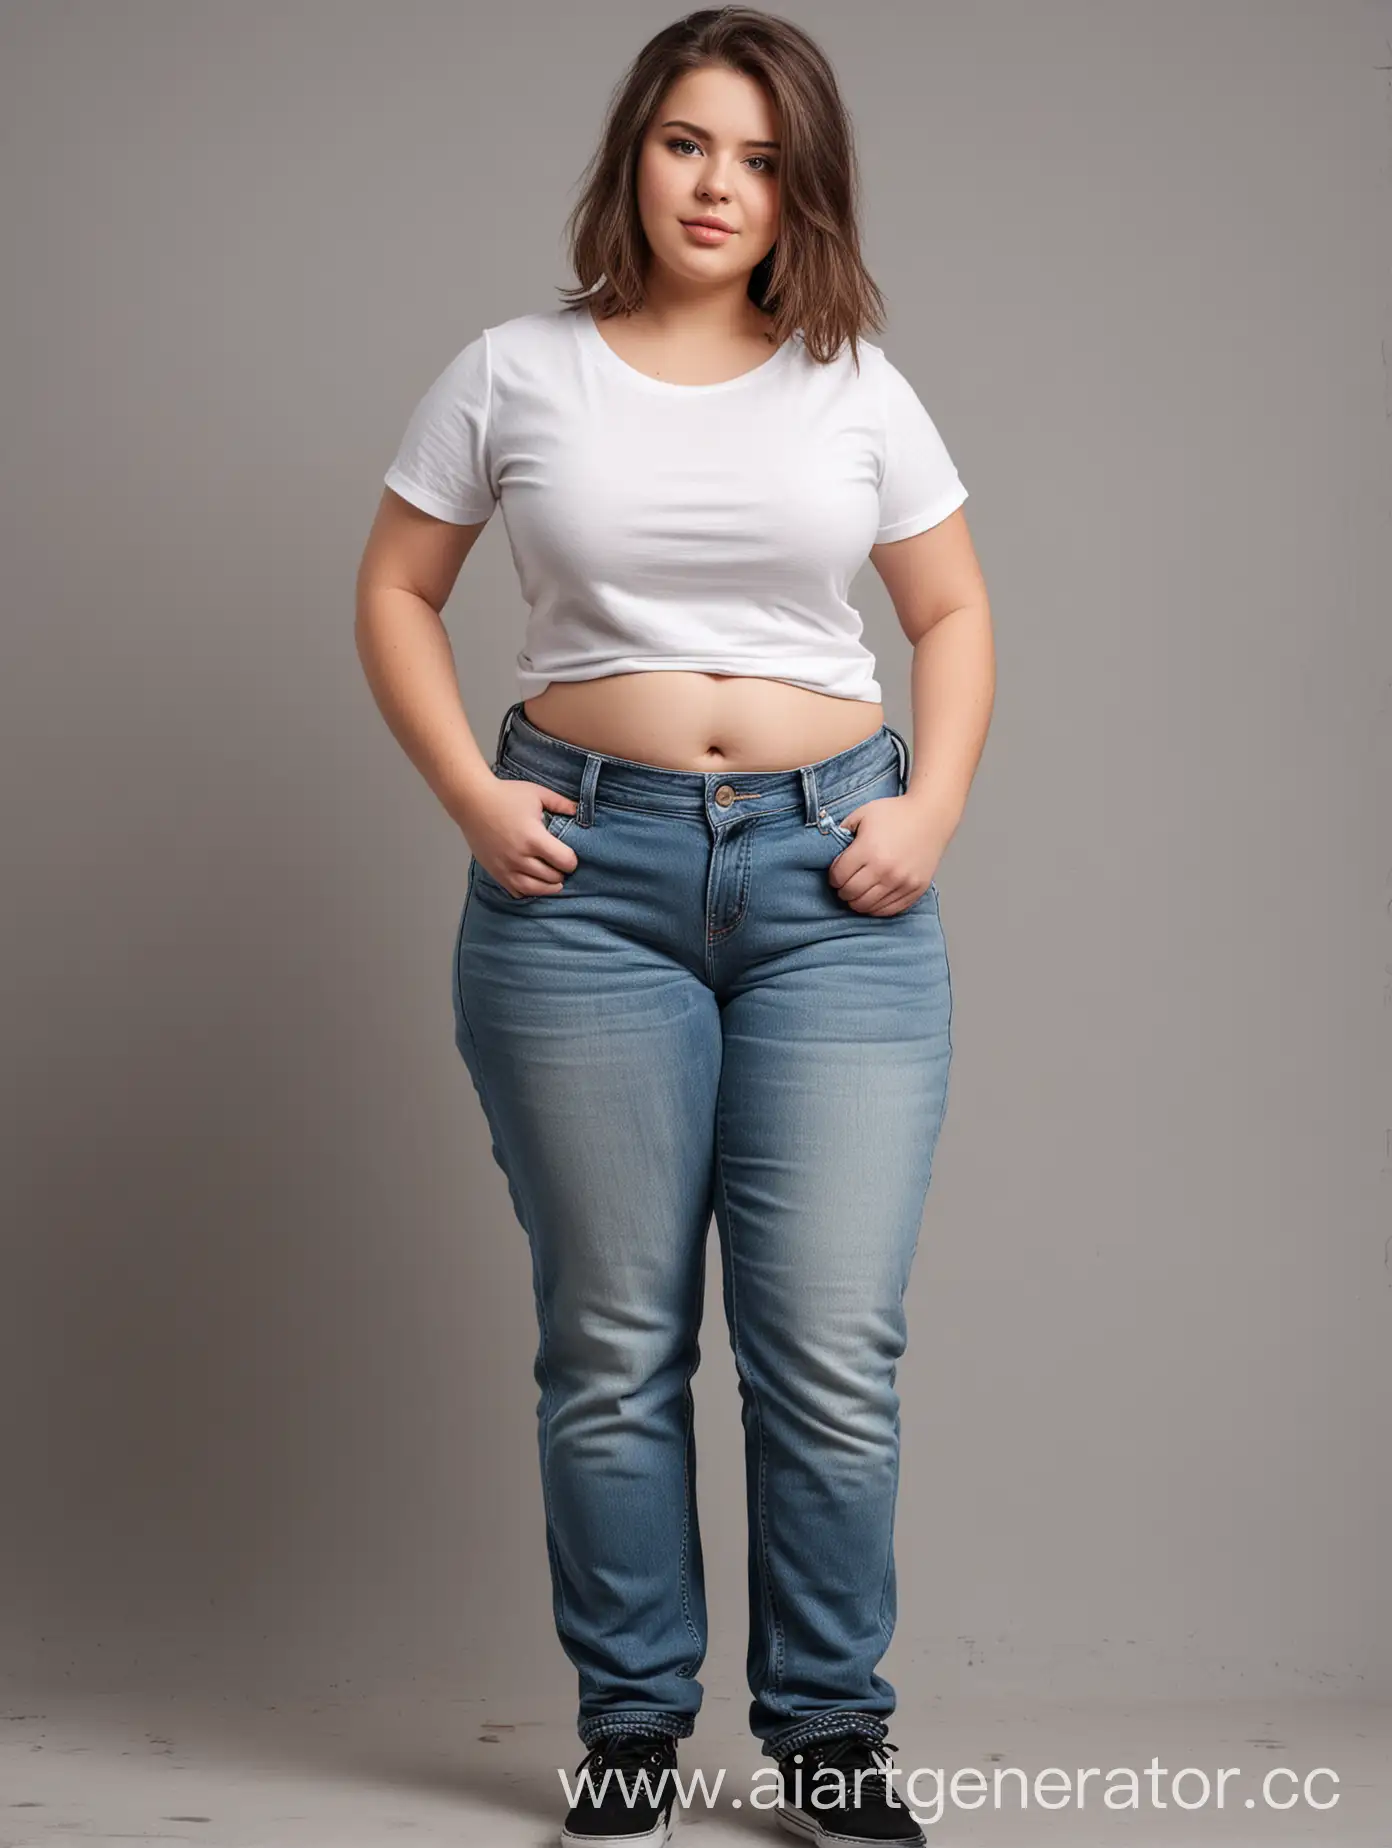 Chubby-Girl-in-TShirt-and-Jeans-with-Wide-Hips